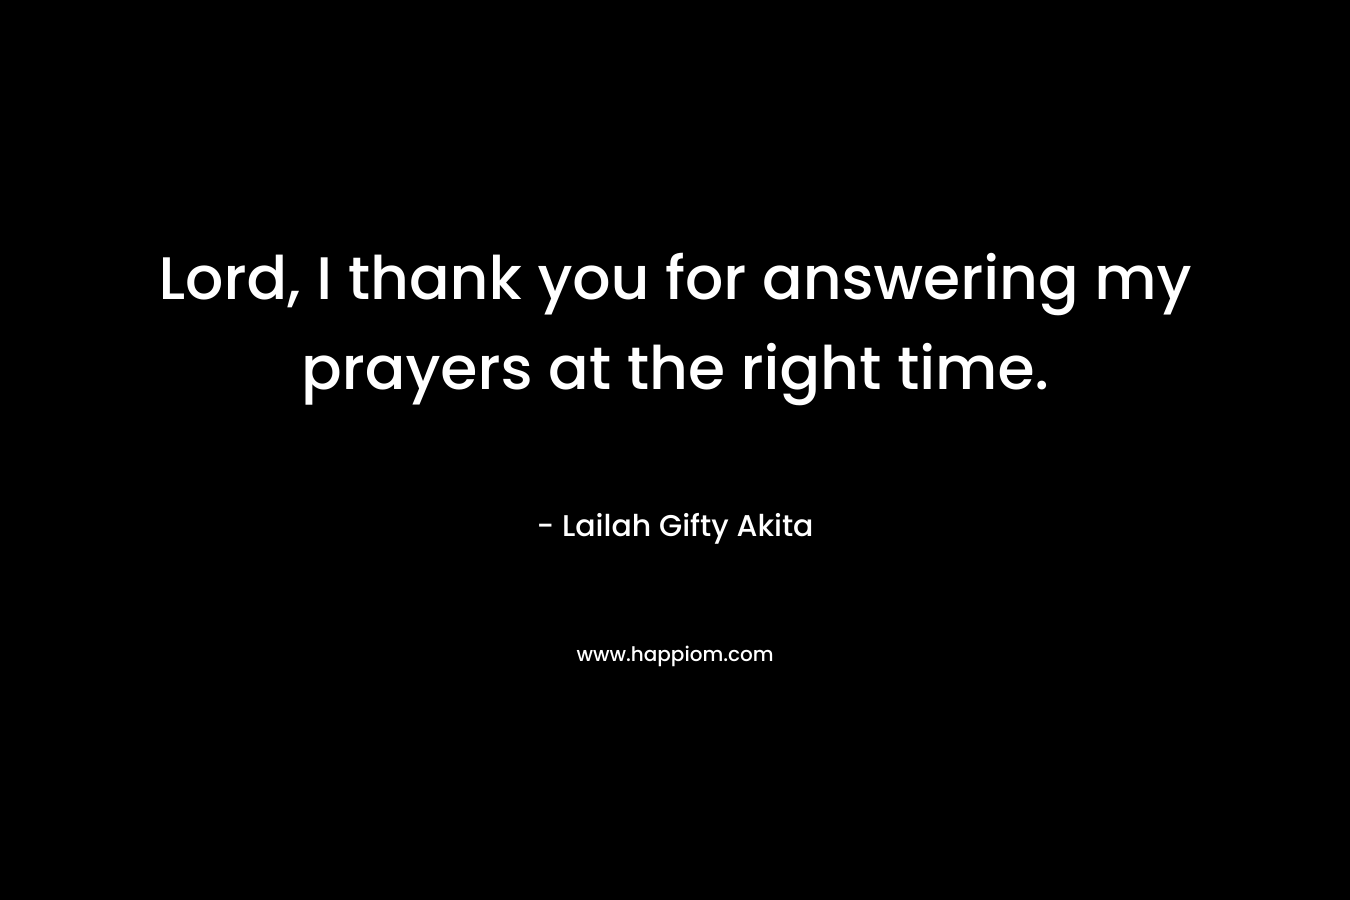 Lord, I thank you for answering my prayers at the right time. – Lailah Gifty Akita